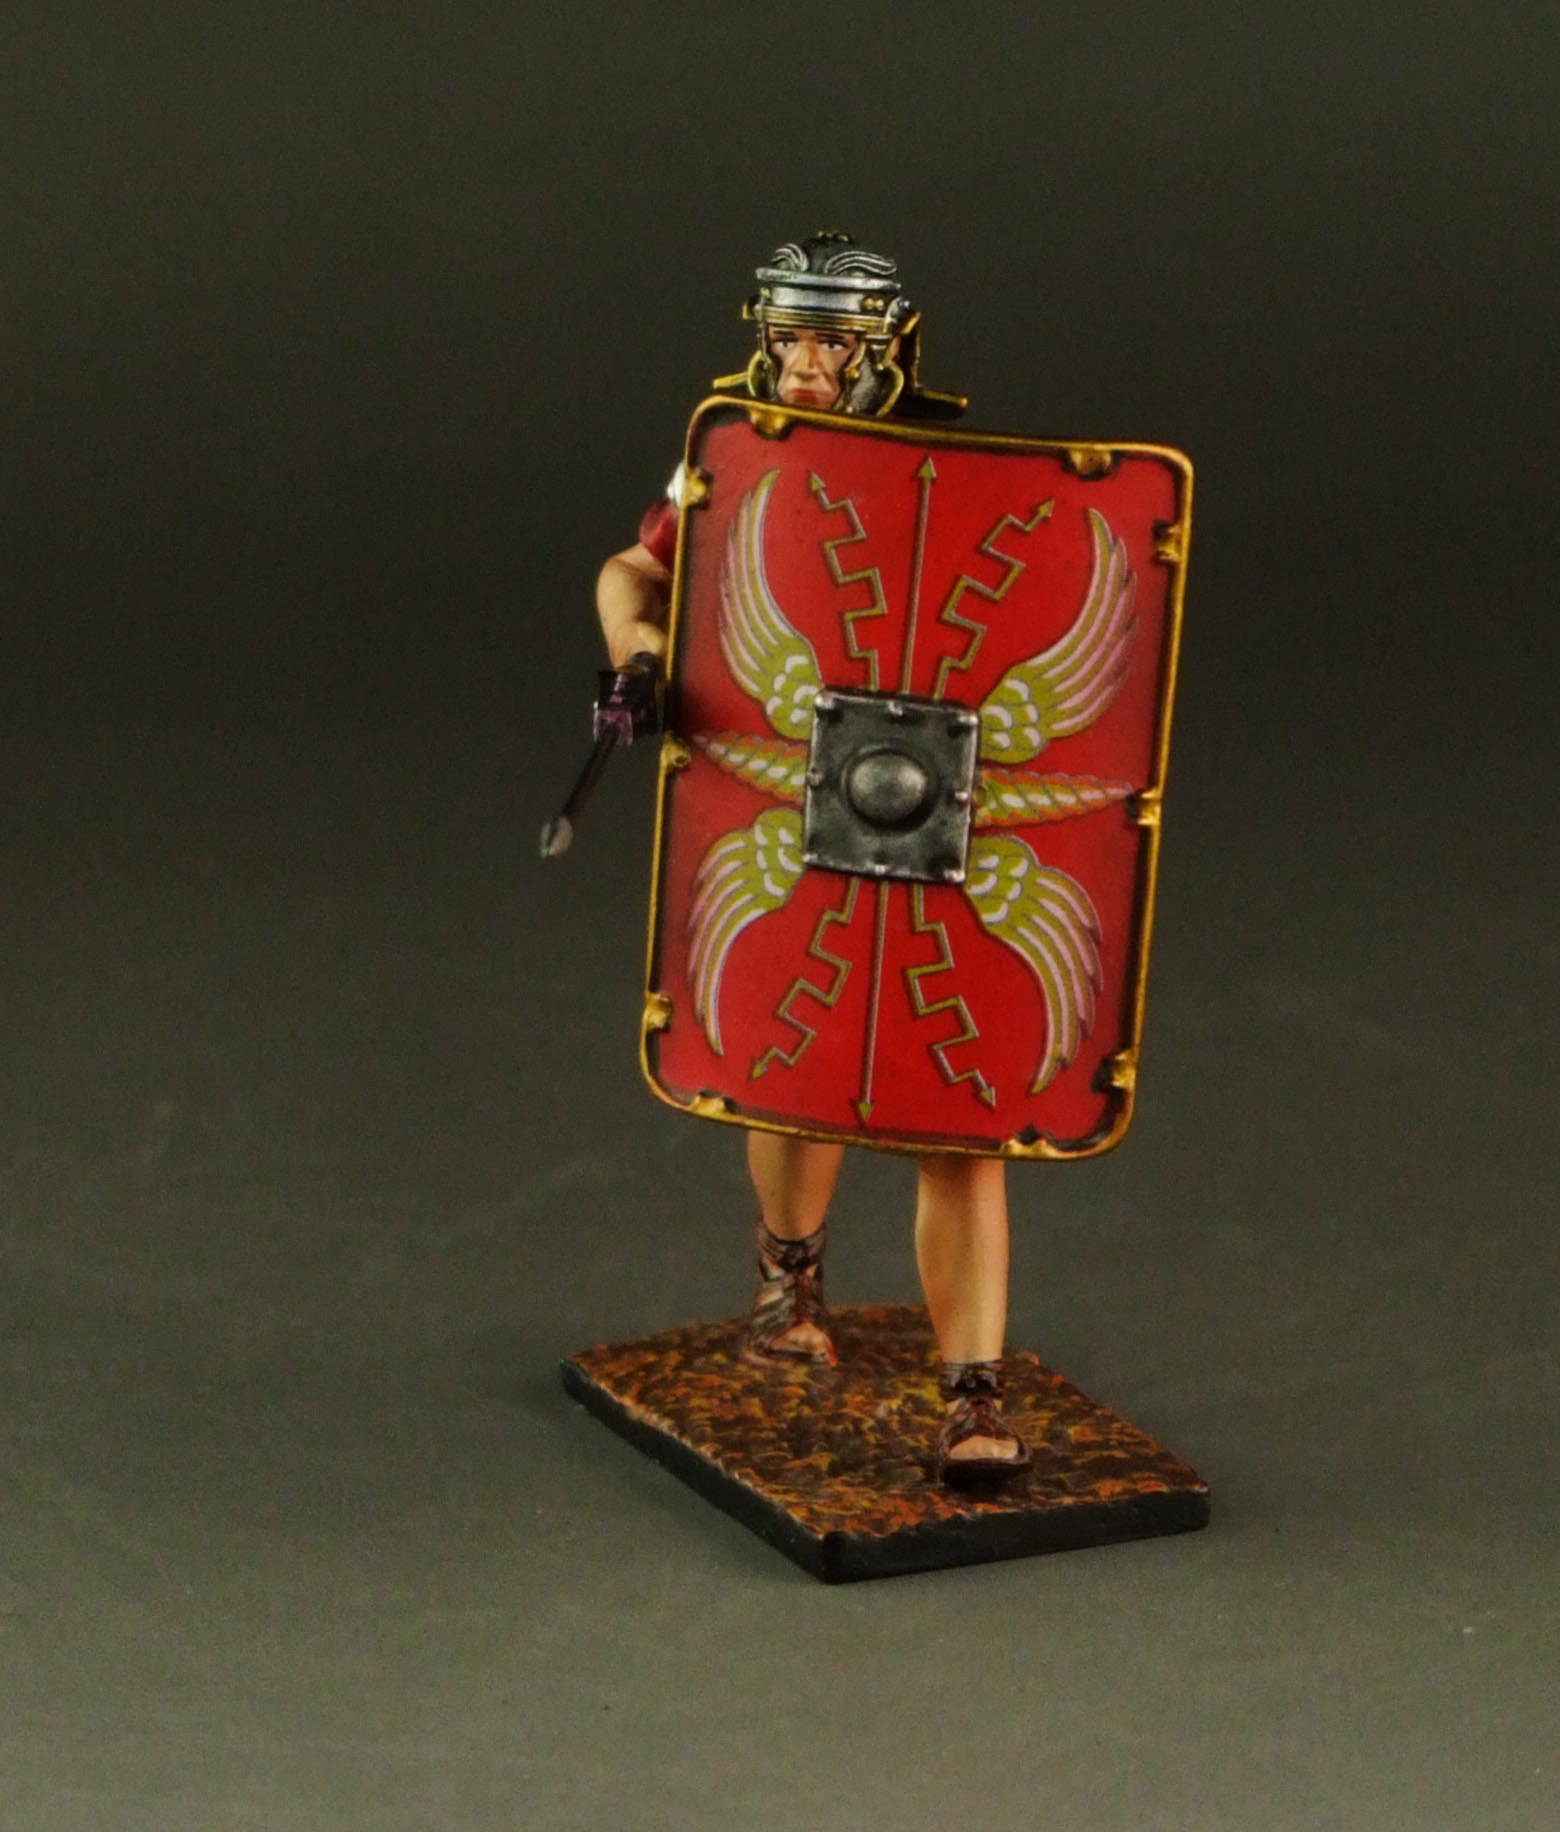 Roman soldier fighting with spear